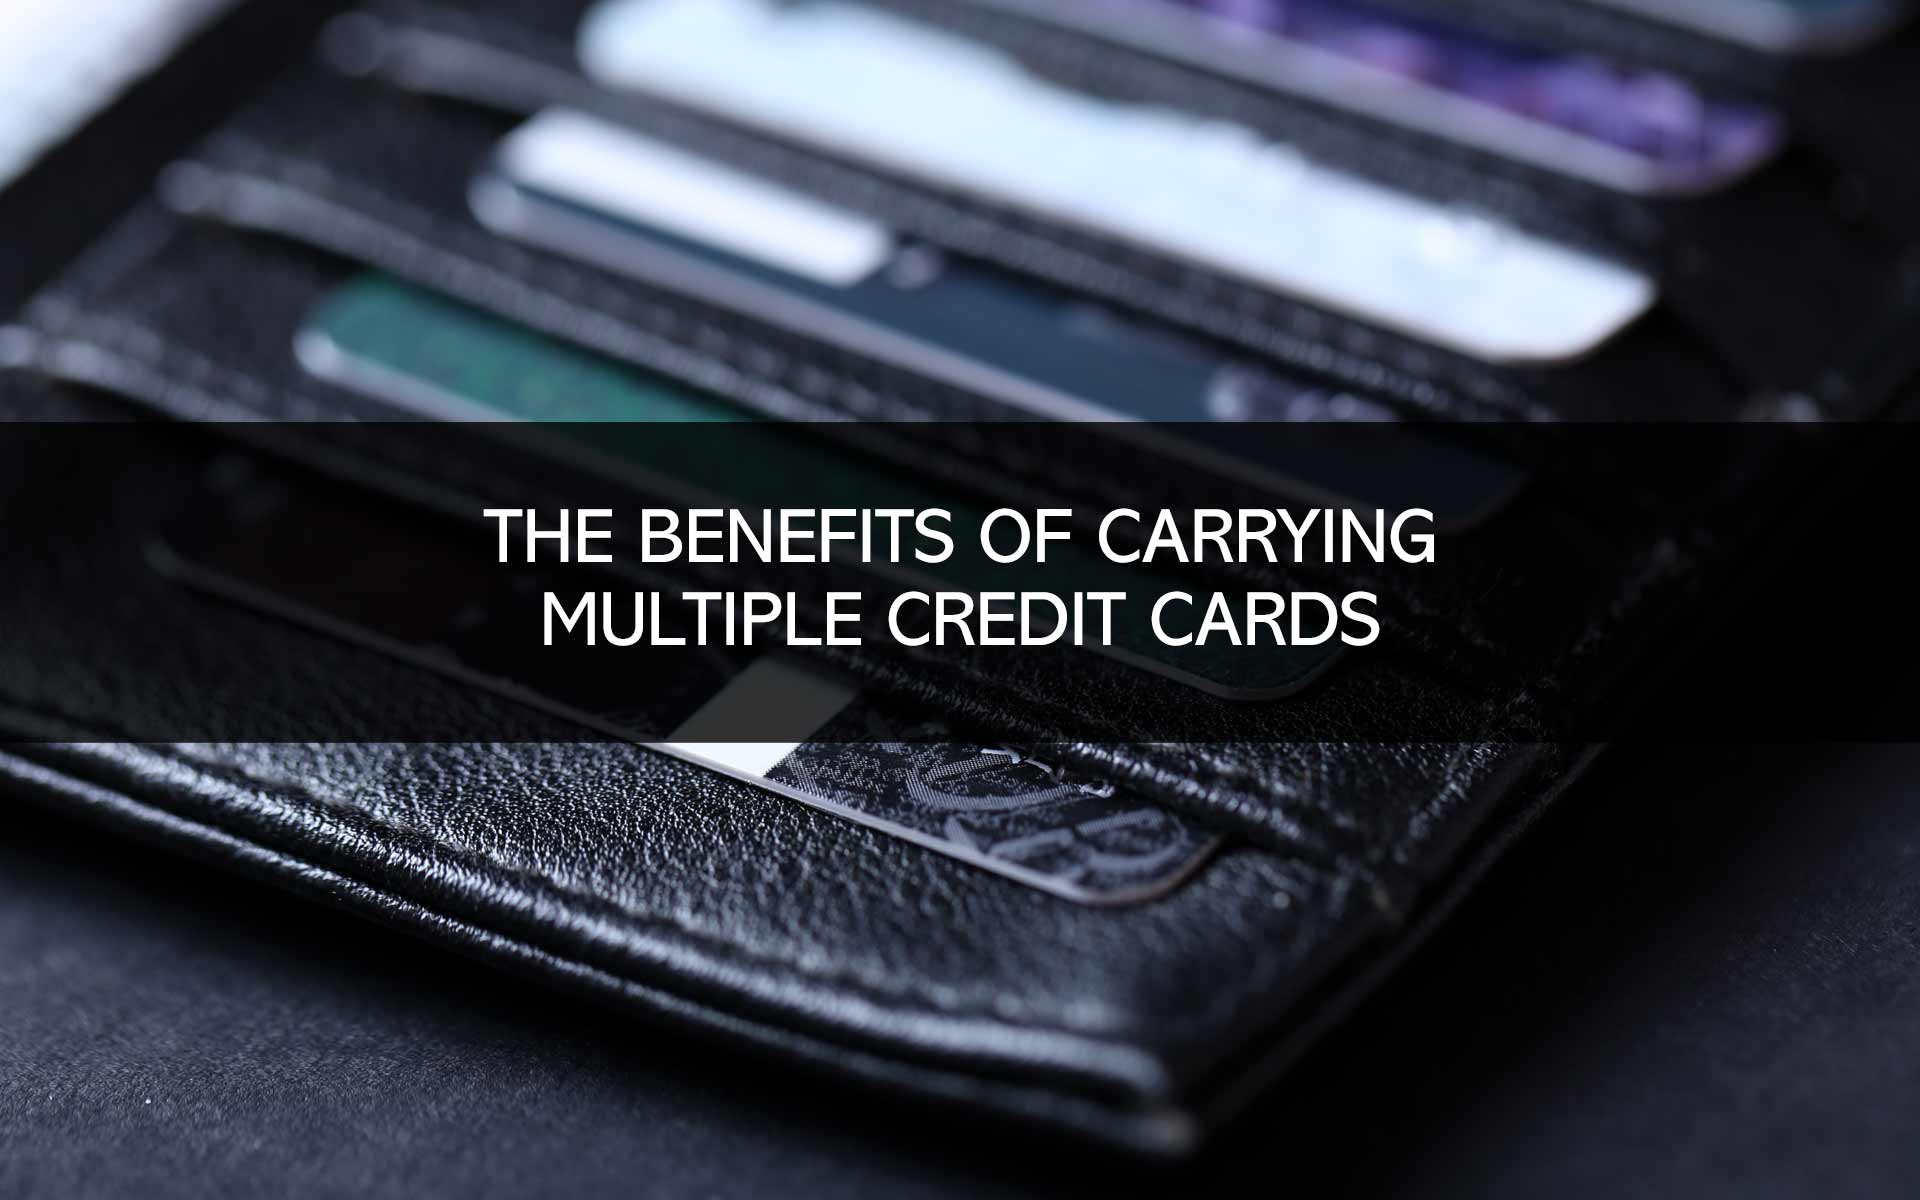 The Benefits of Carrying Multiple Credit Cards